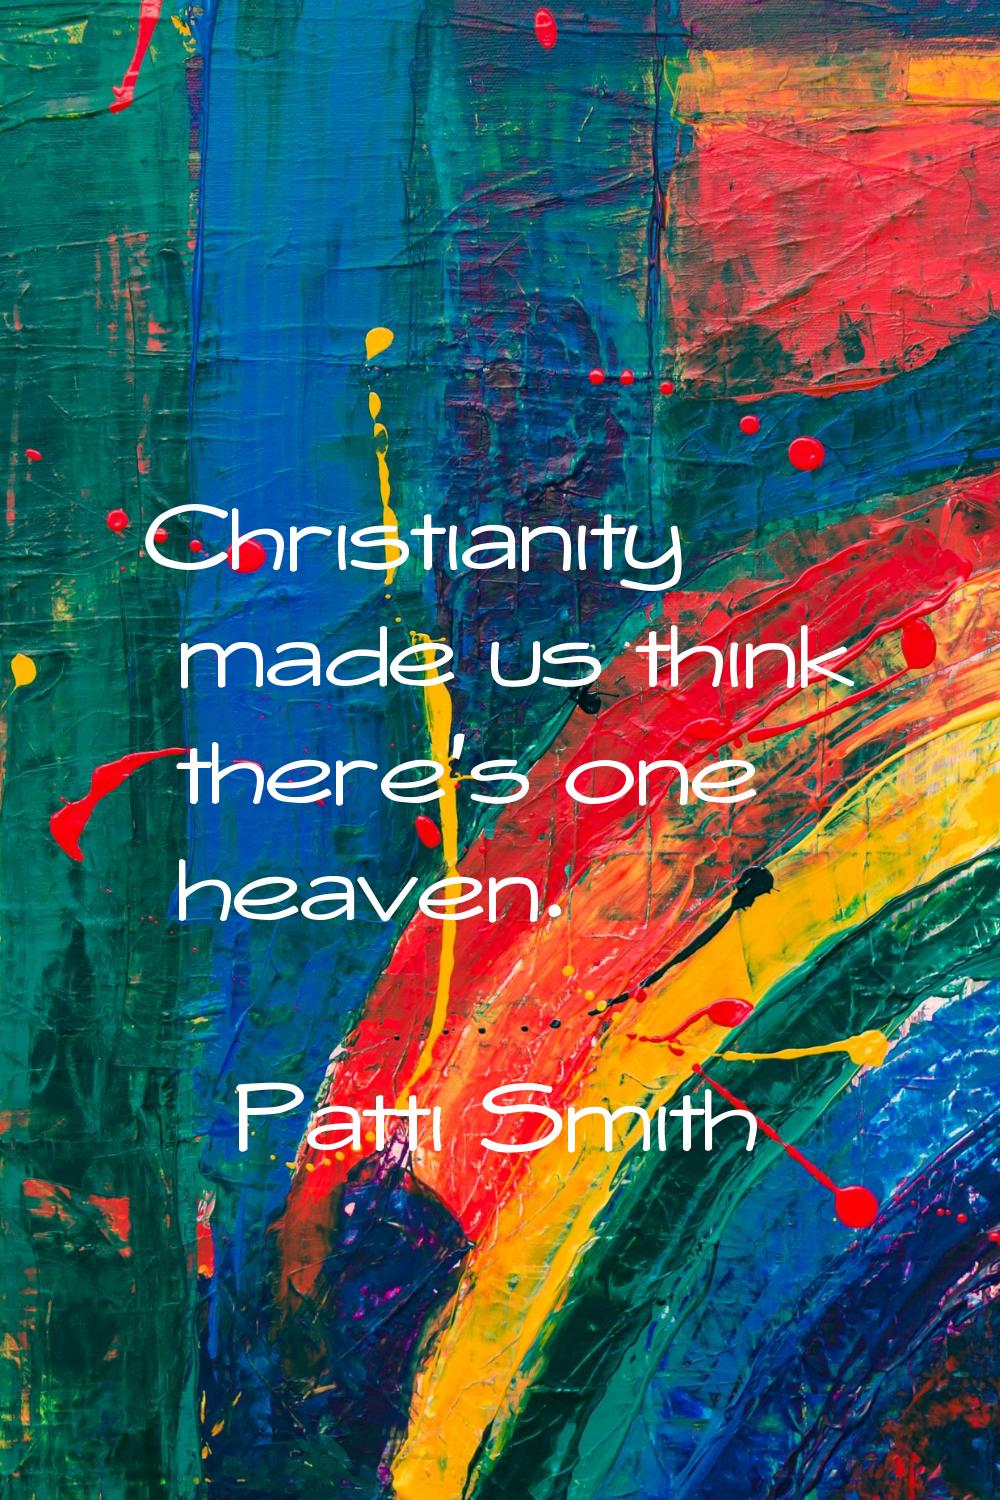 Christianity made us think there's one heaven.